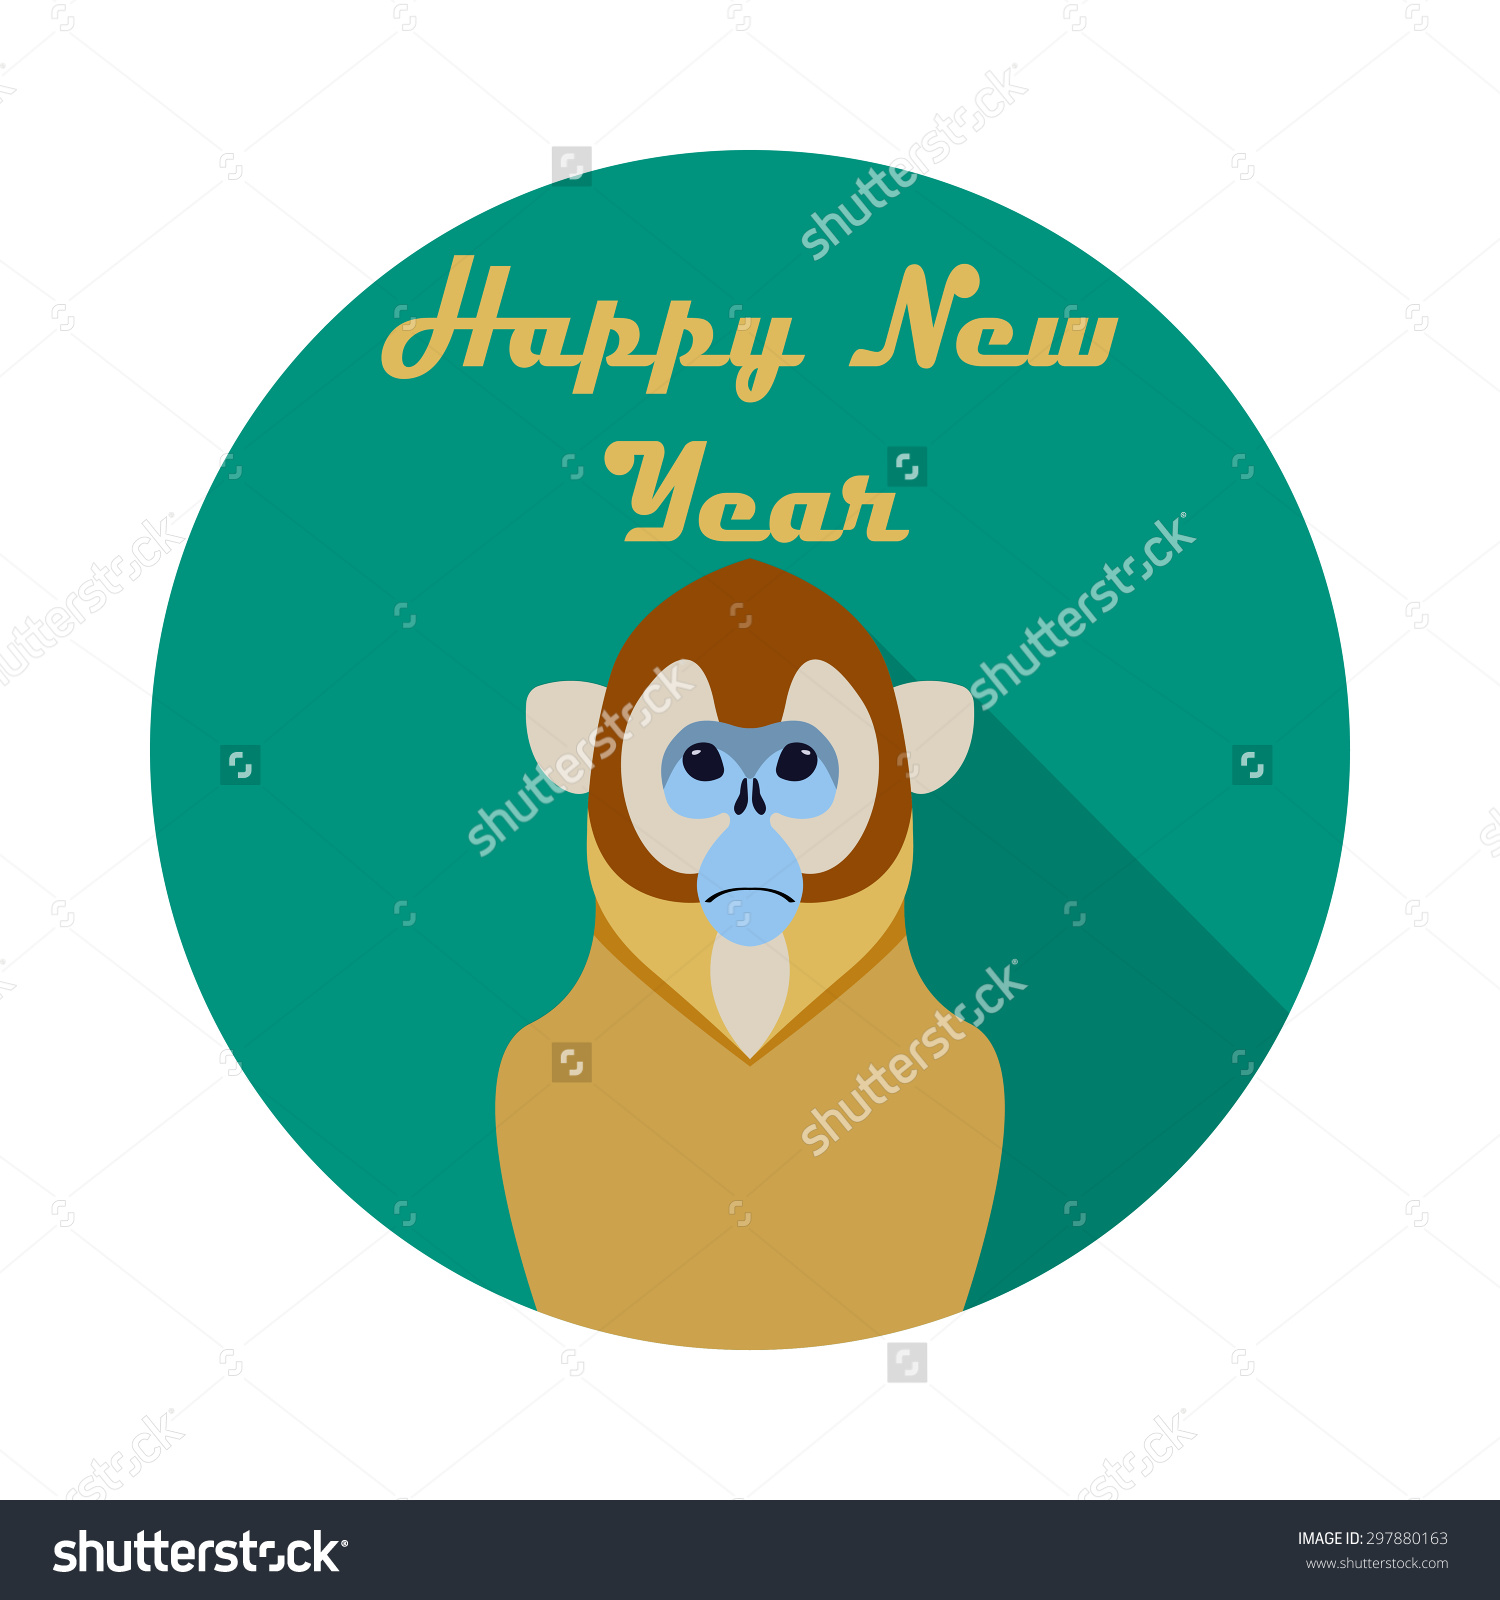 Golden Snub-nosed Monkey clipart #3, Download drawings